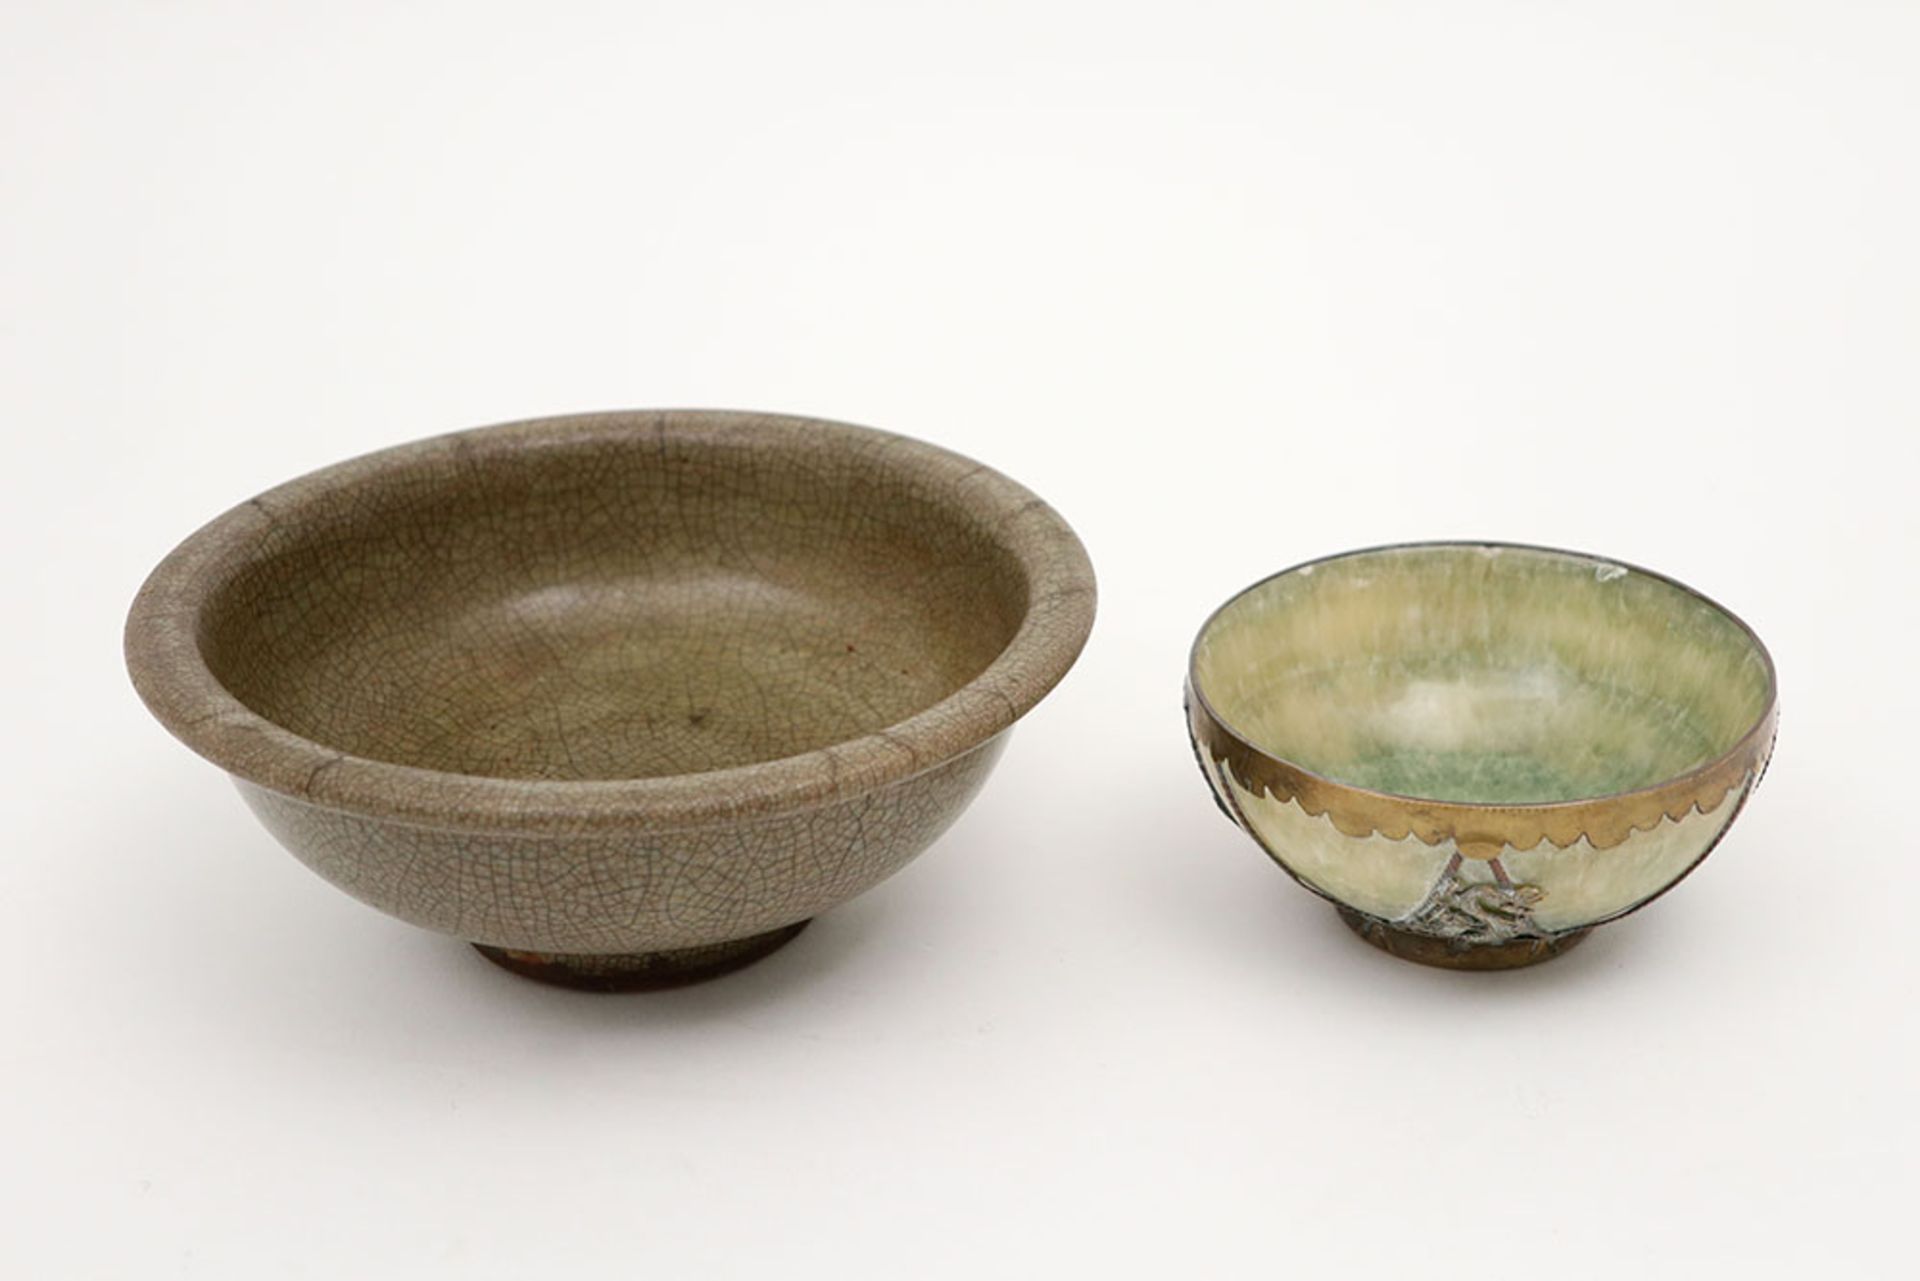 antique Chinese bowl in crackle glazed porcelain and a small Chinese marked bowl in a greenish stone - Image 2 of 7